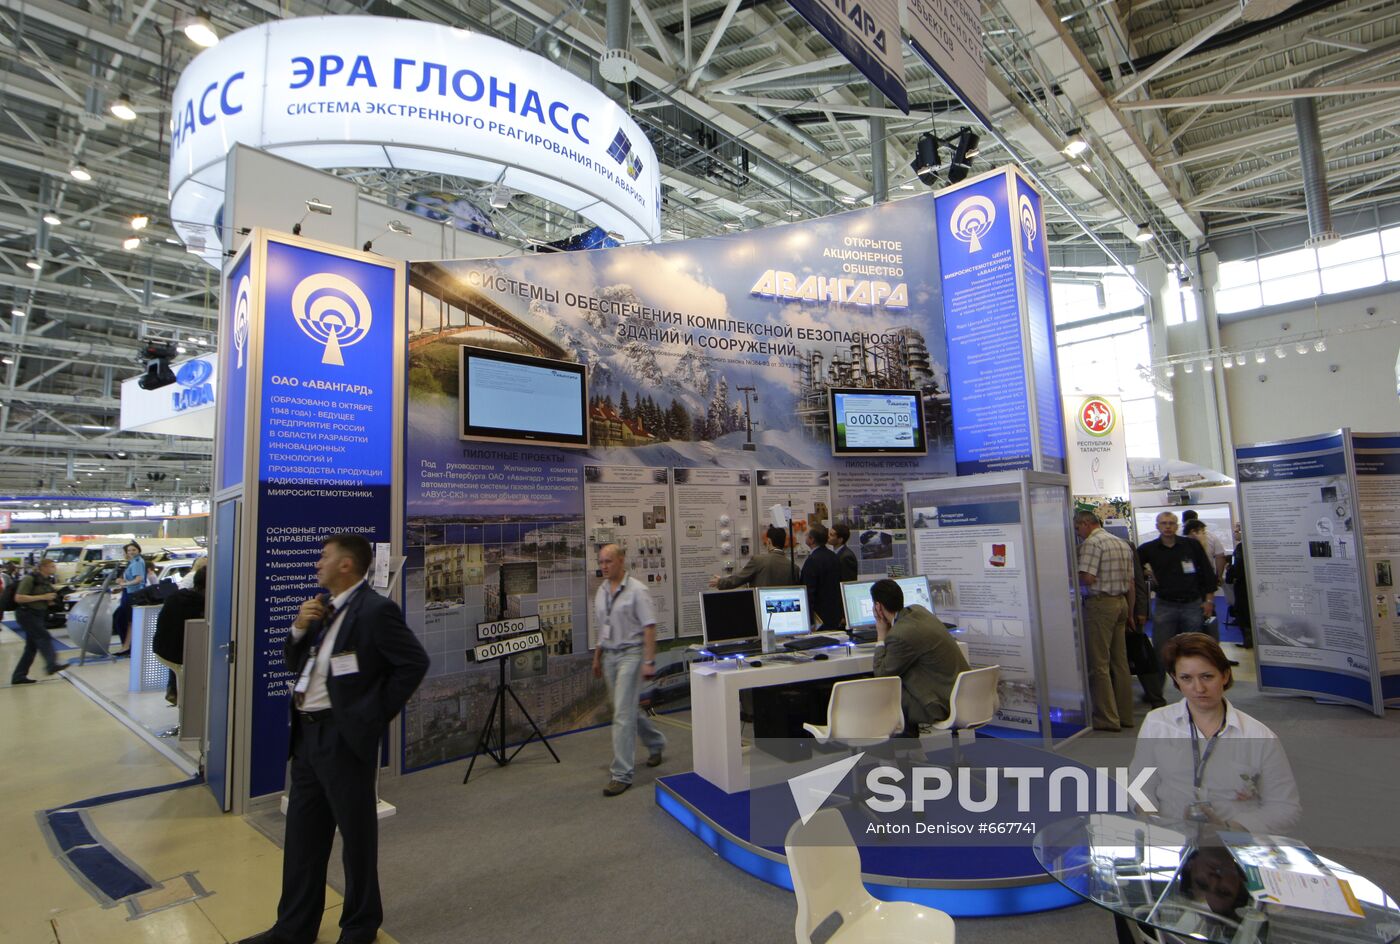 Integrated Safety and Security 2010 International Exhibition